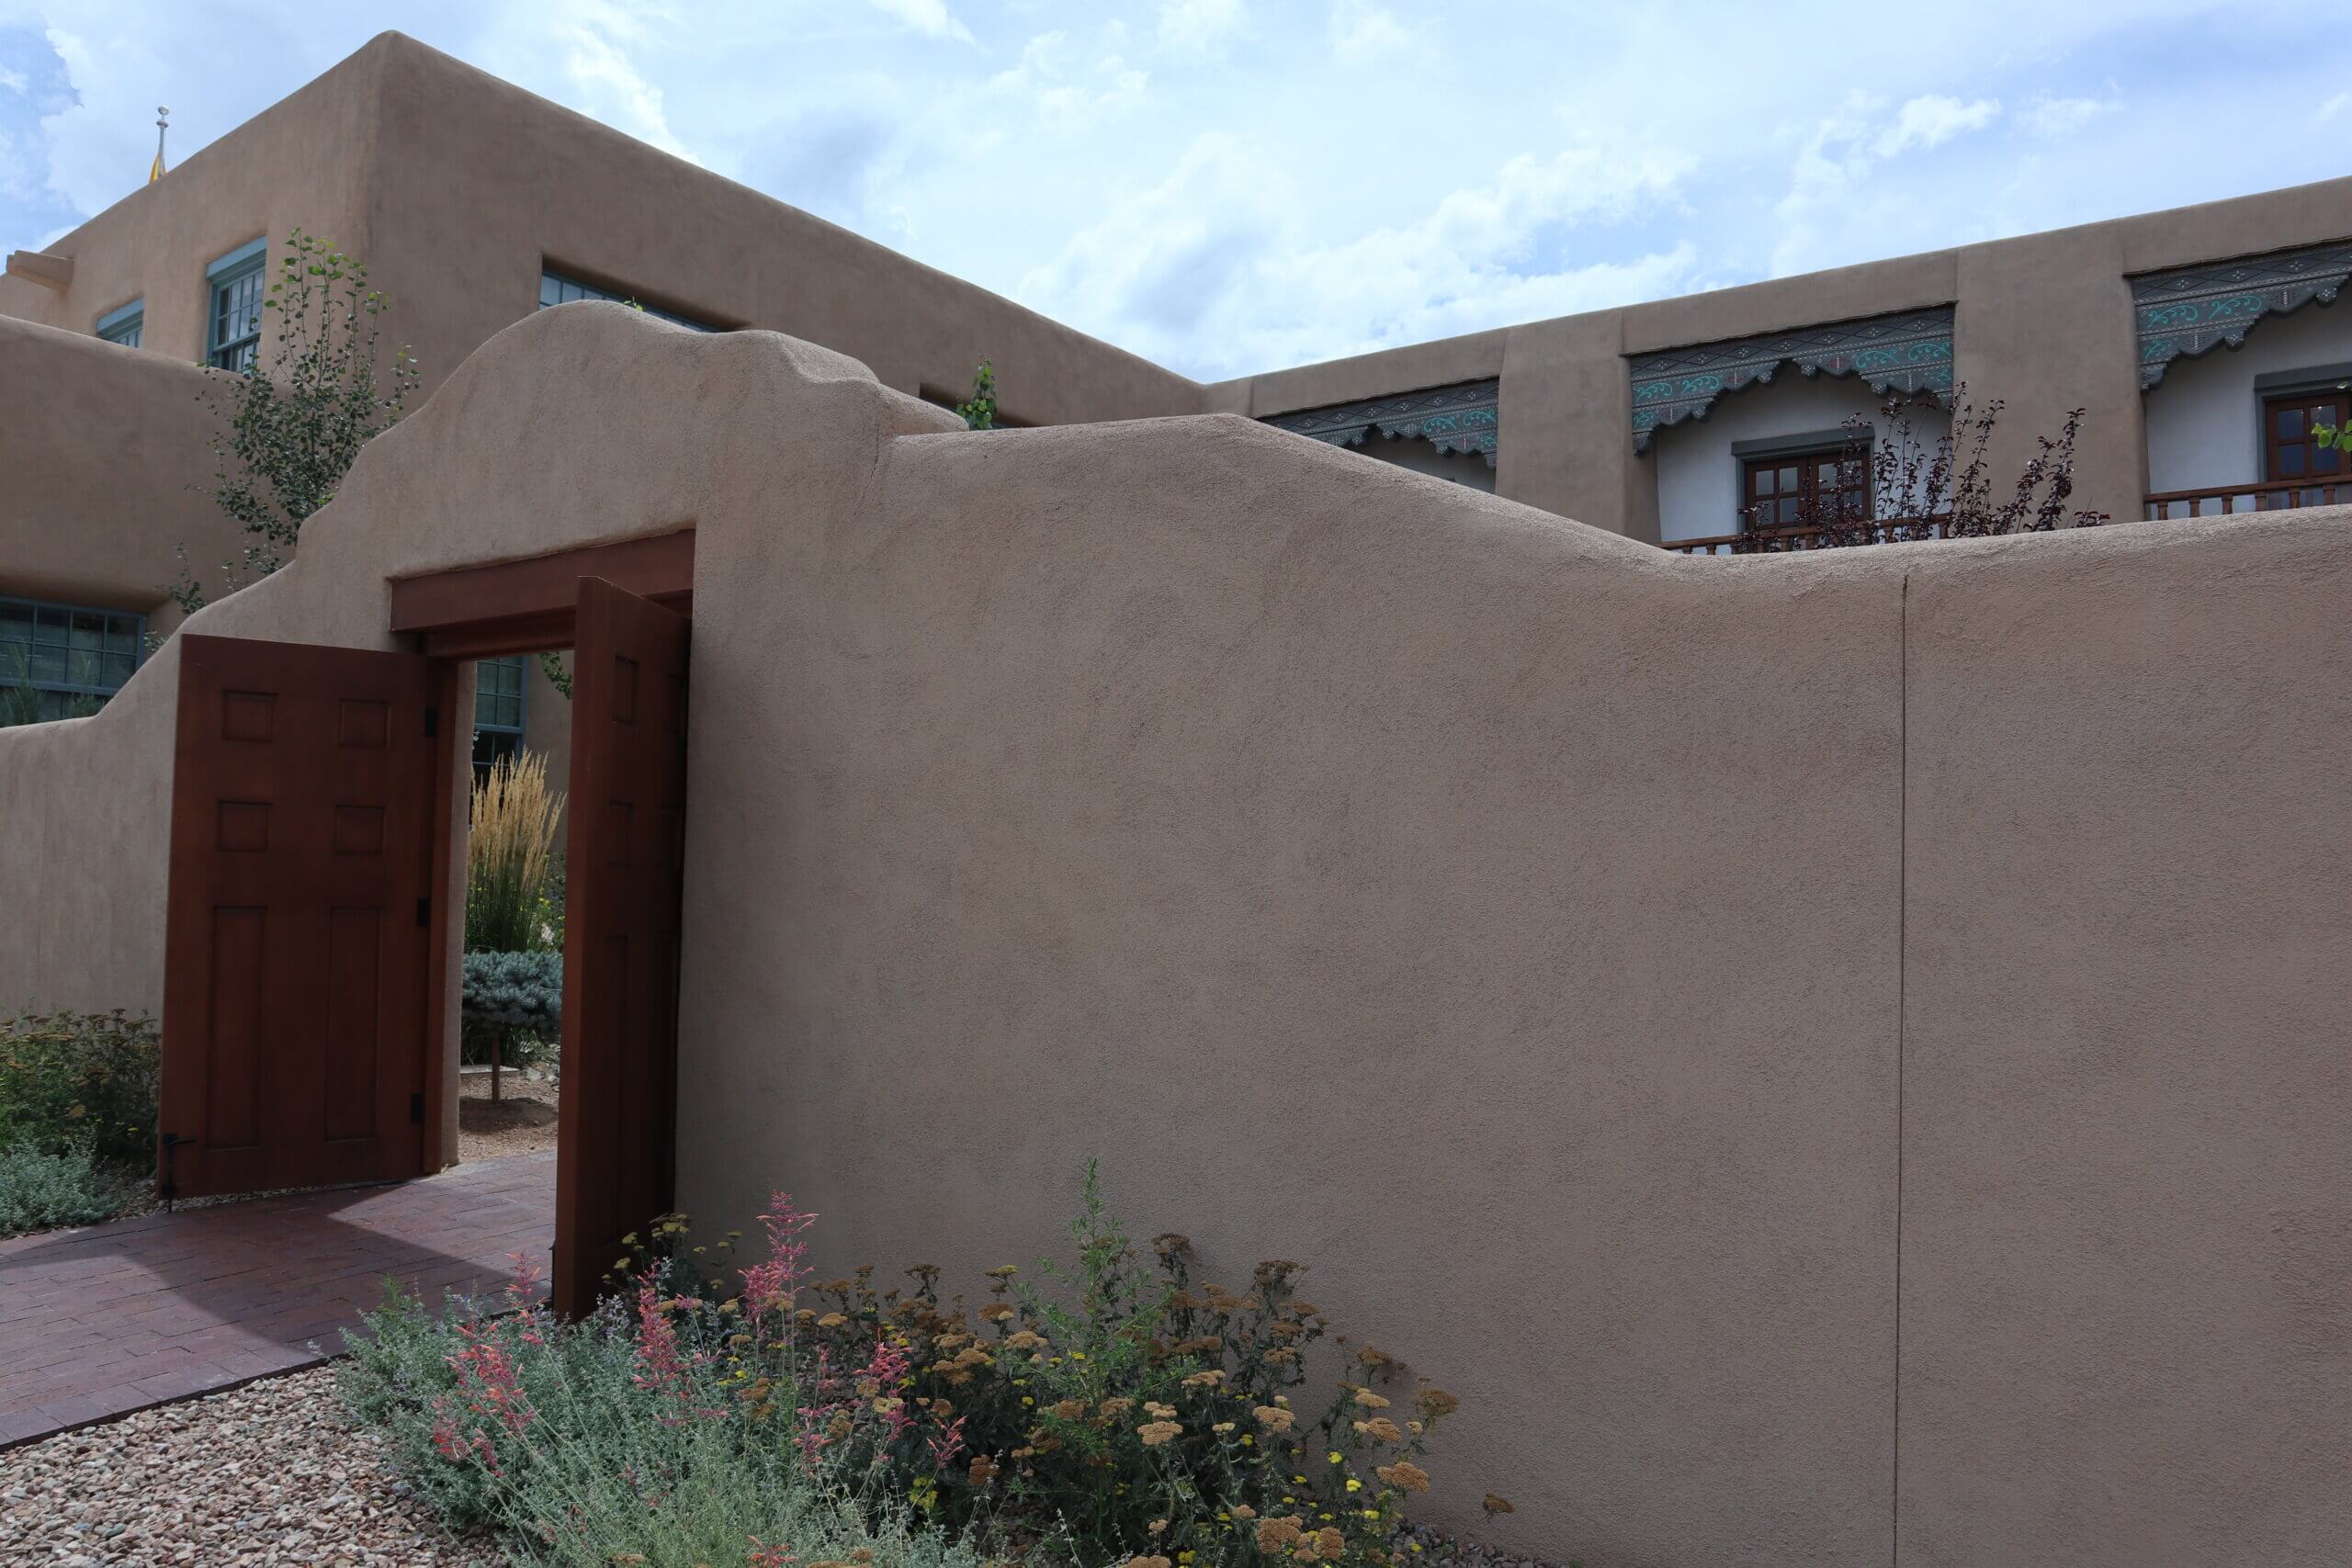 A First Timer’s Guide to Santa Fe, New Mexico